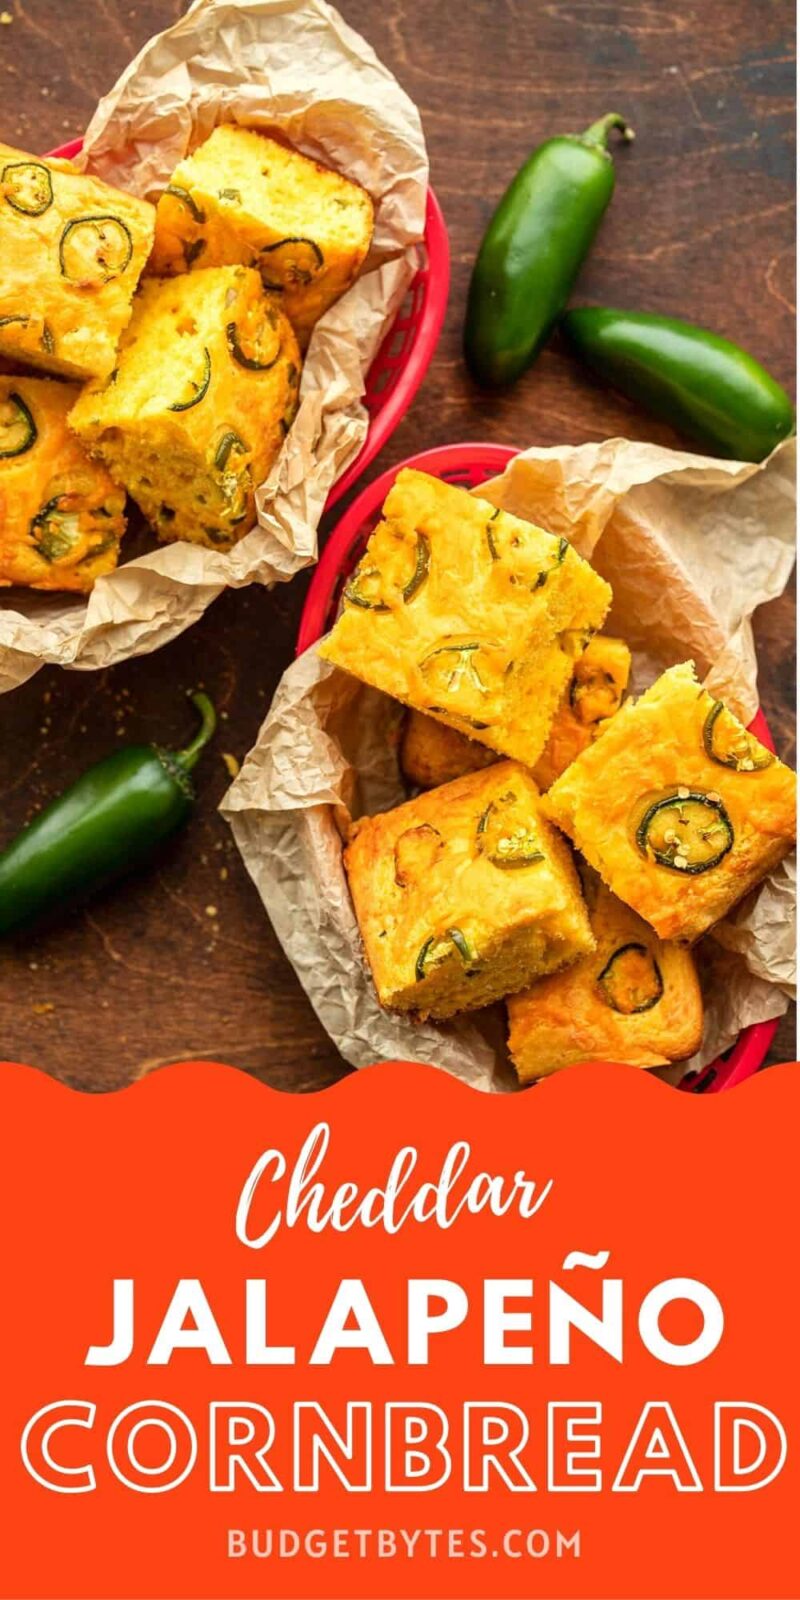 Two baskets full of jalapeño Cheddar Cornbread with title text at the bottom